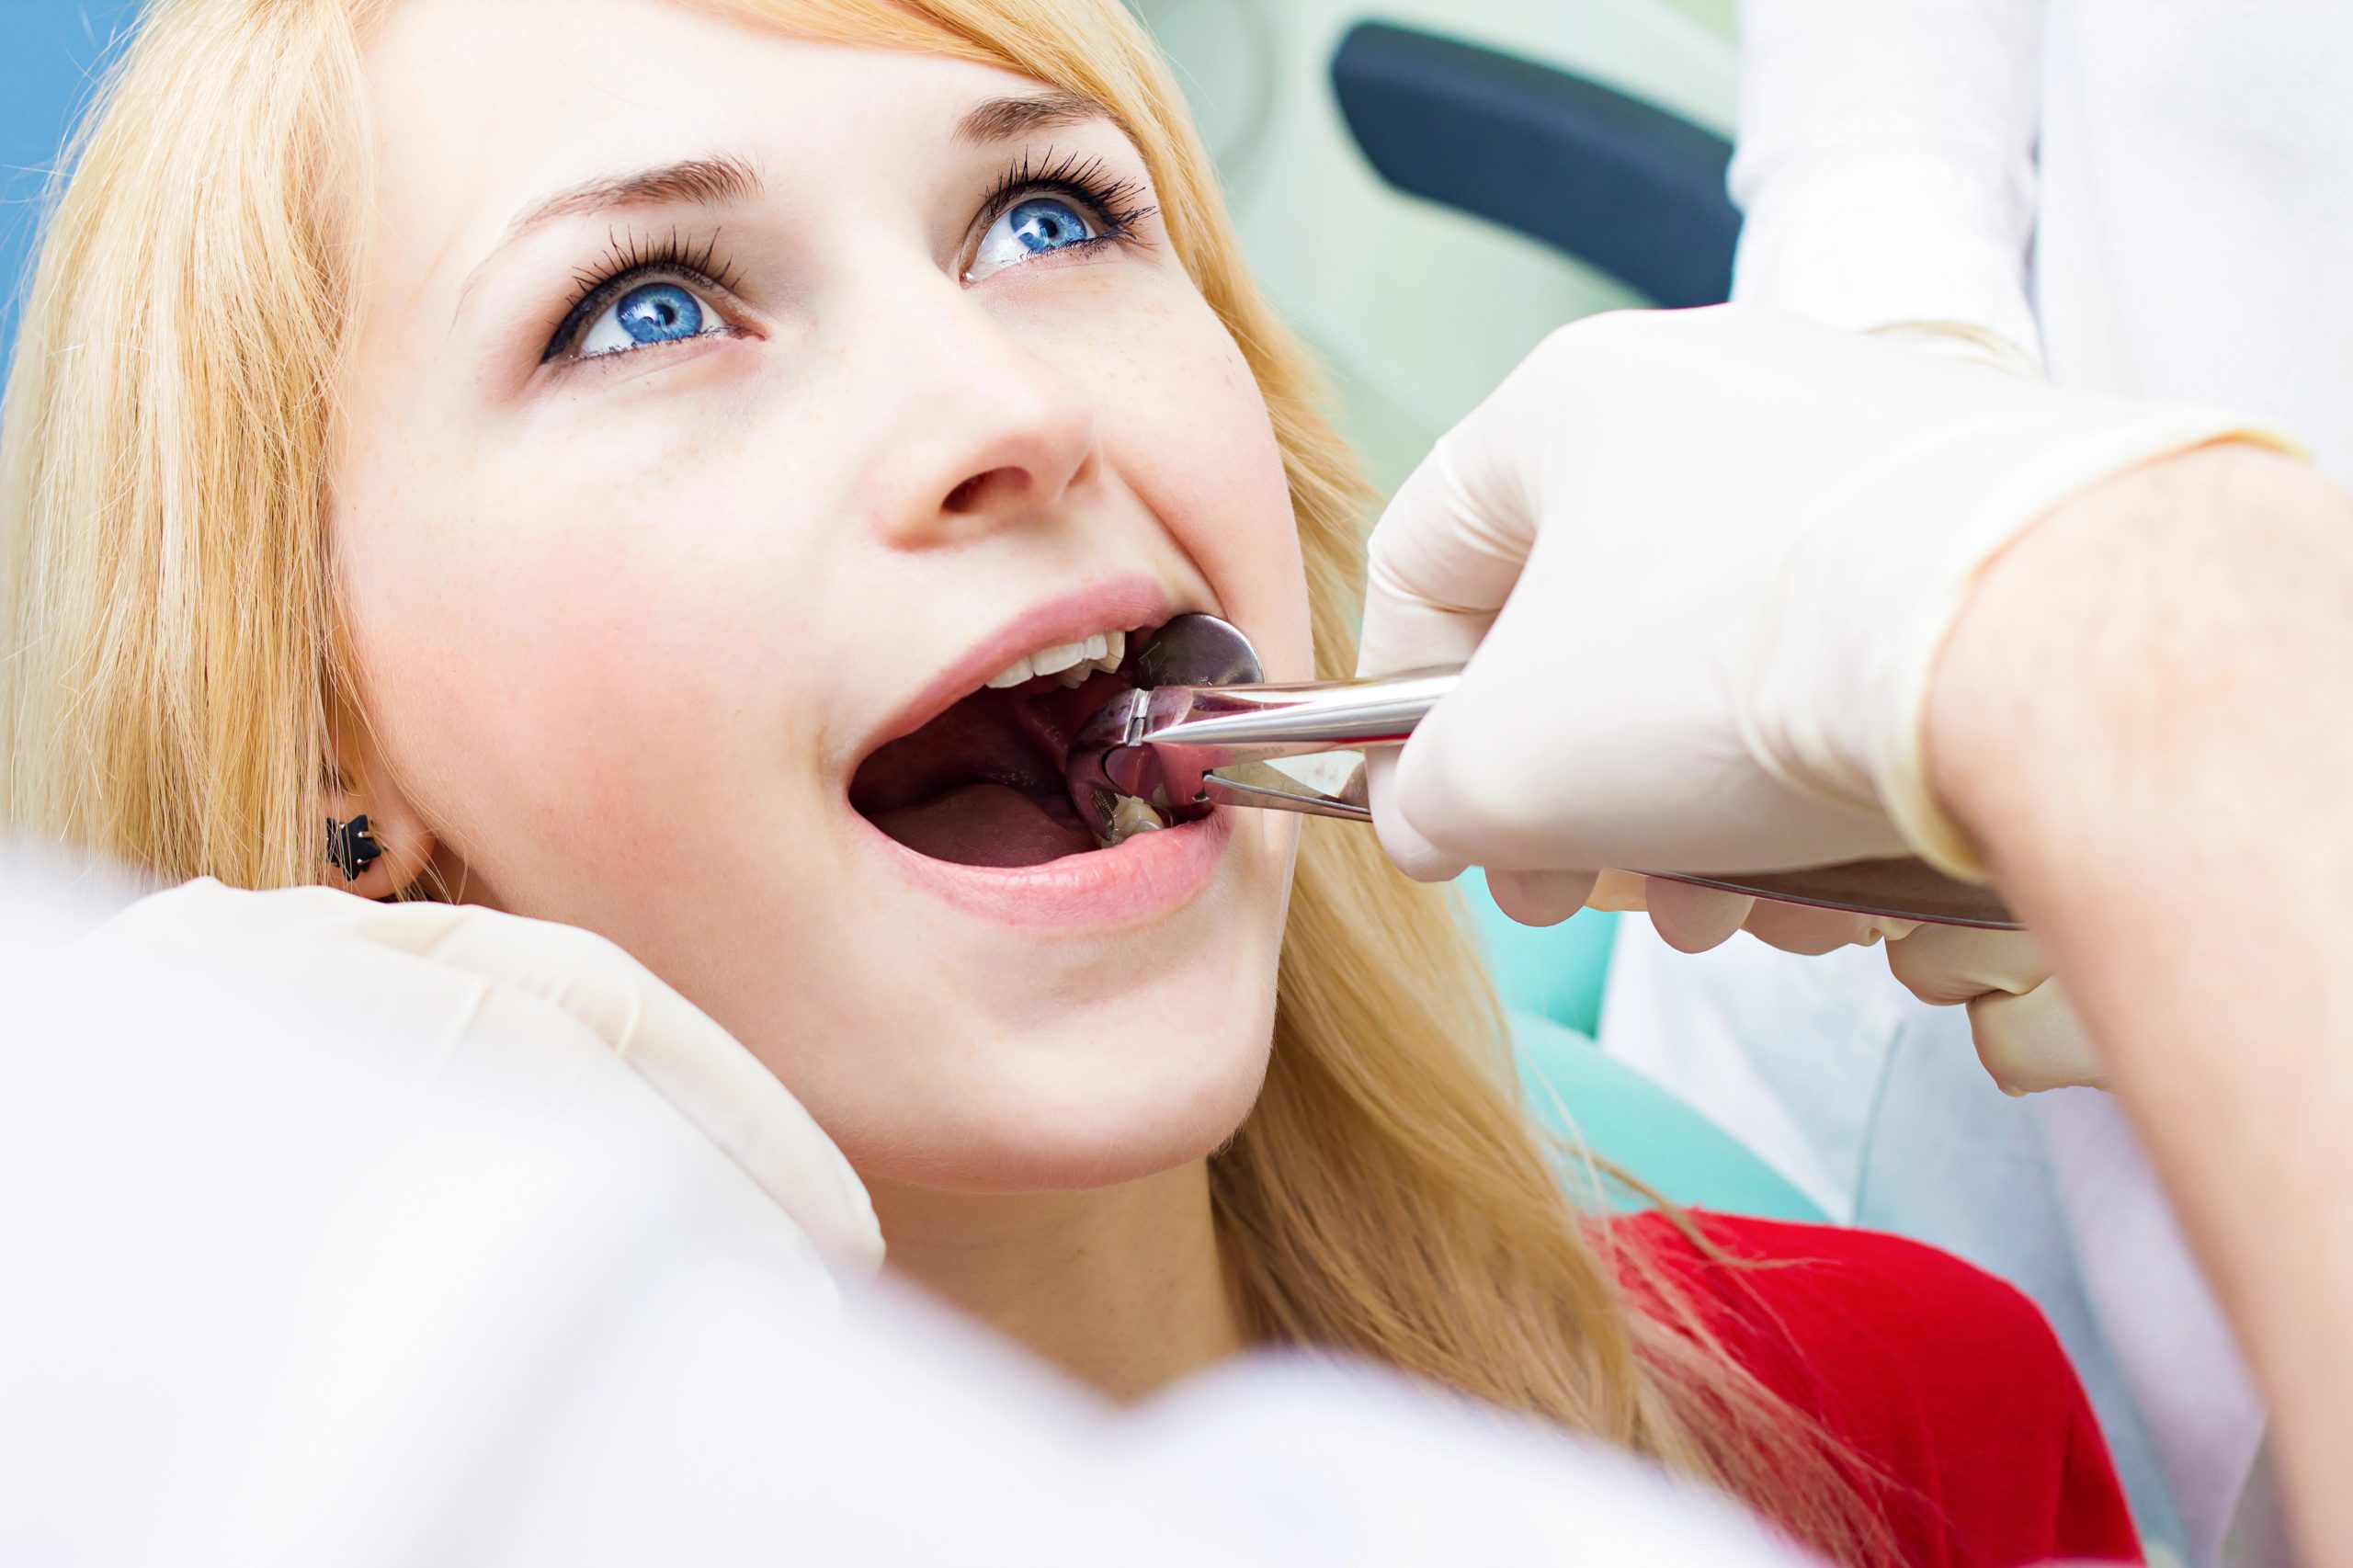 Tooth Extraction Benefits: Why It’s Necessary